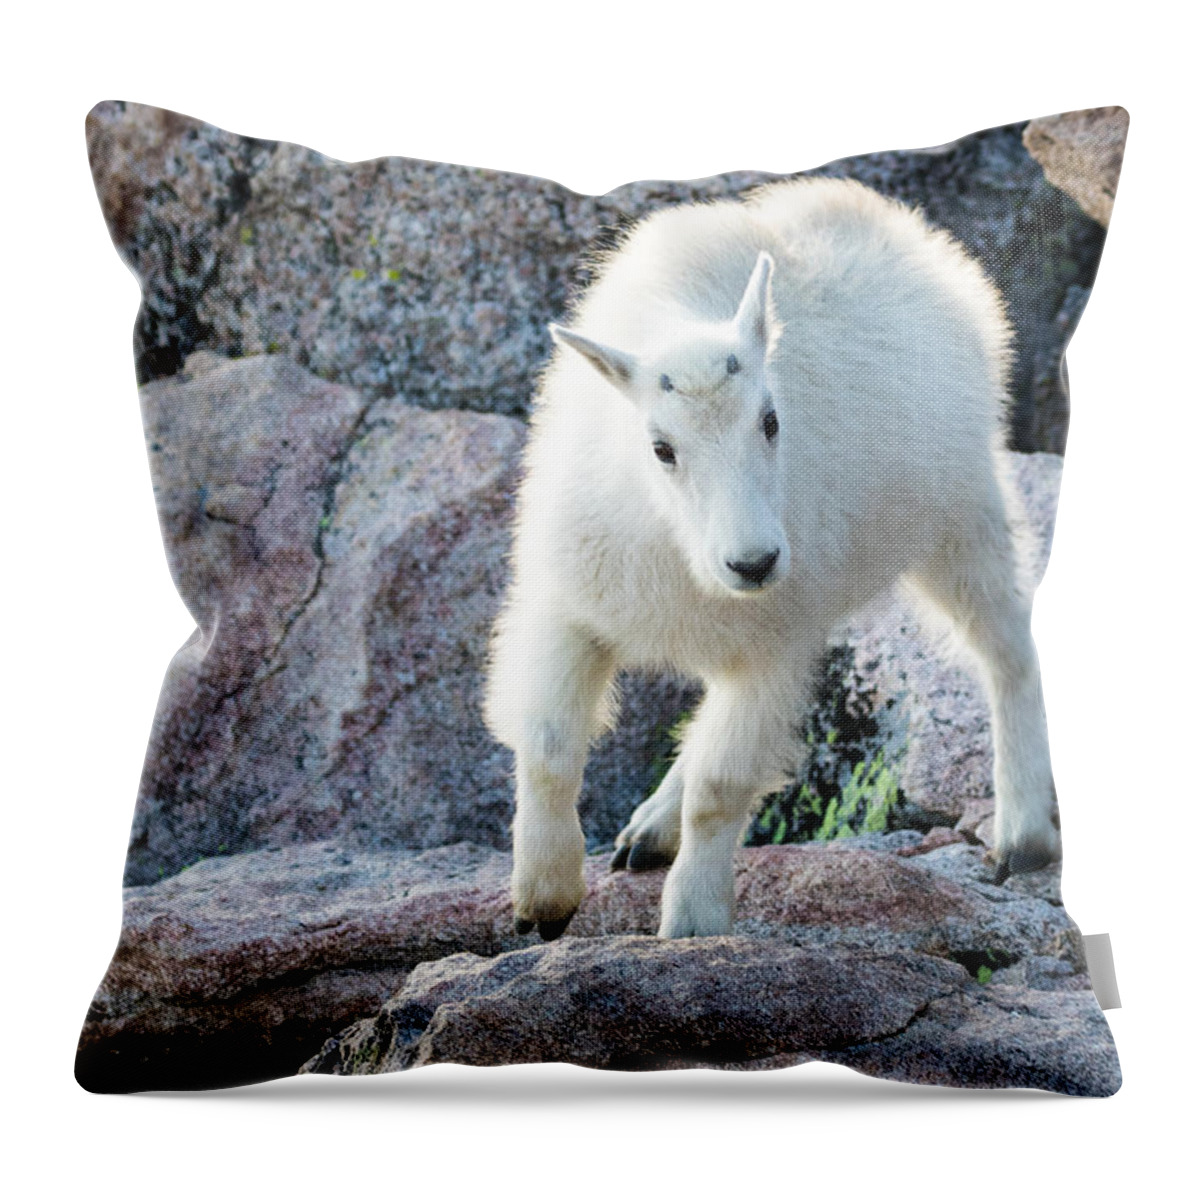 Mountain Goat Throw Pillow featuring the photograph Winter Coats #2 by Mindy Musick King